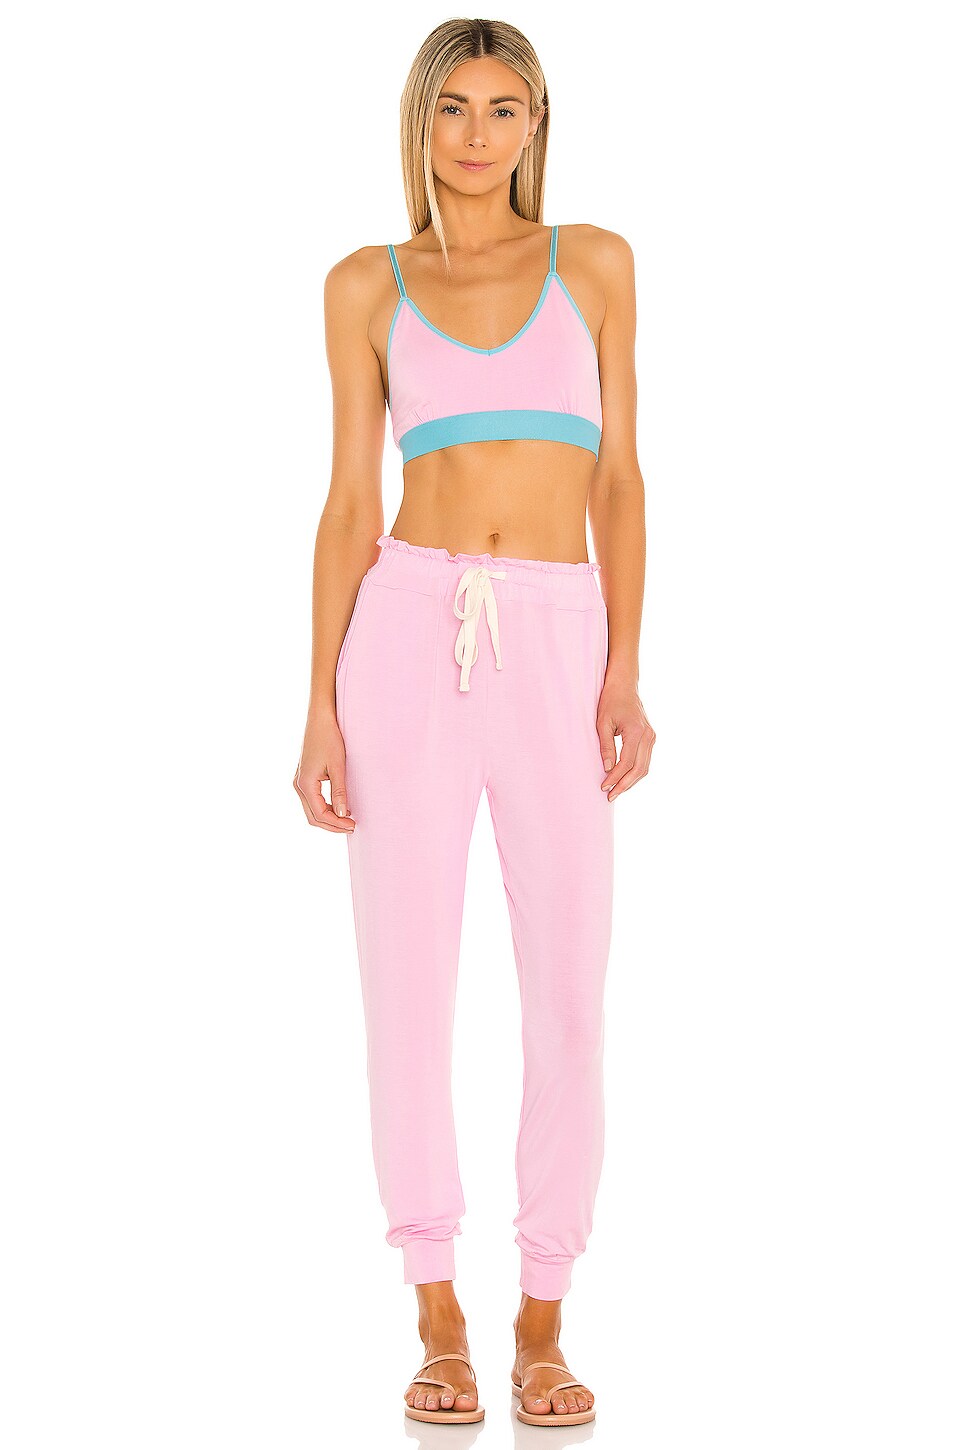 Stripe & Stare Candy Floss Lounge Pant Candy Floss